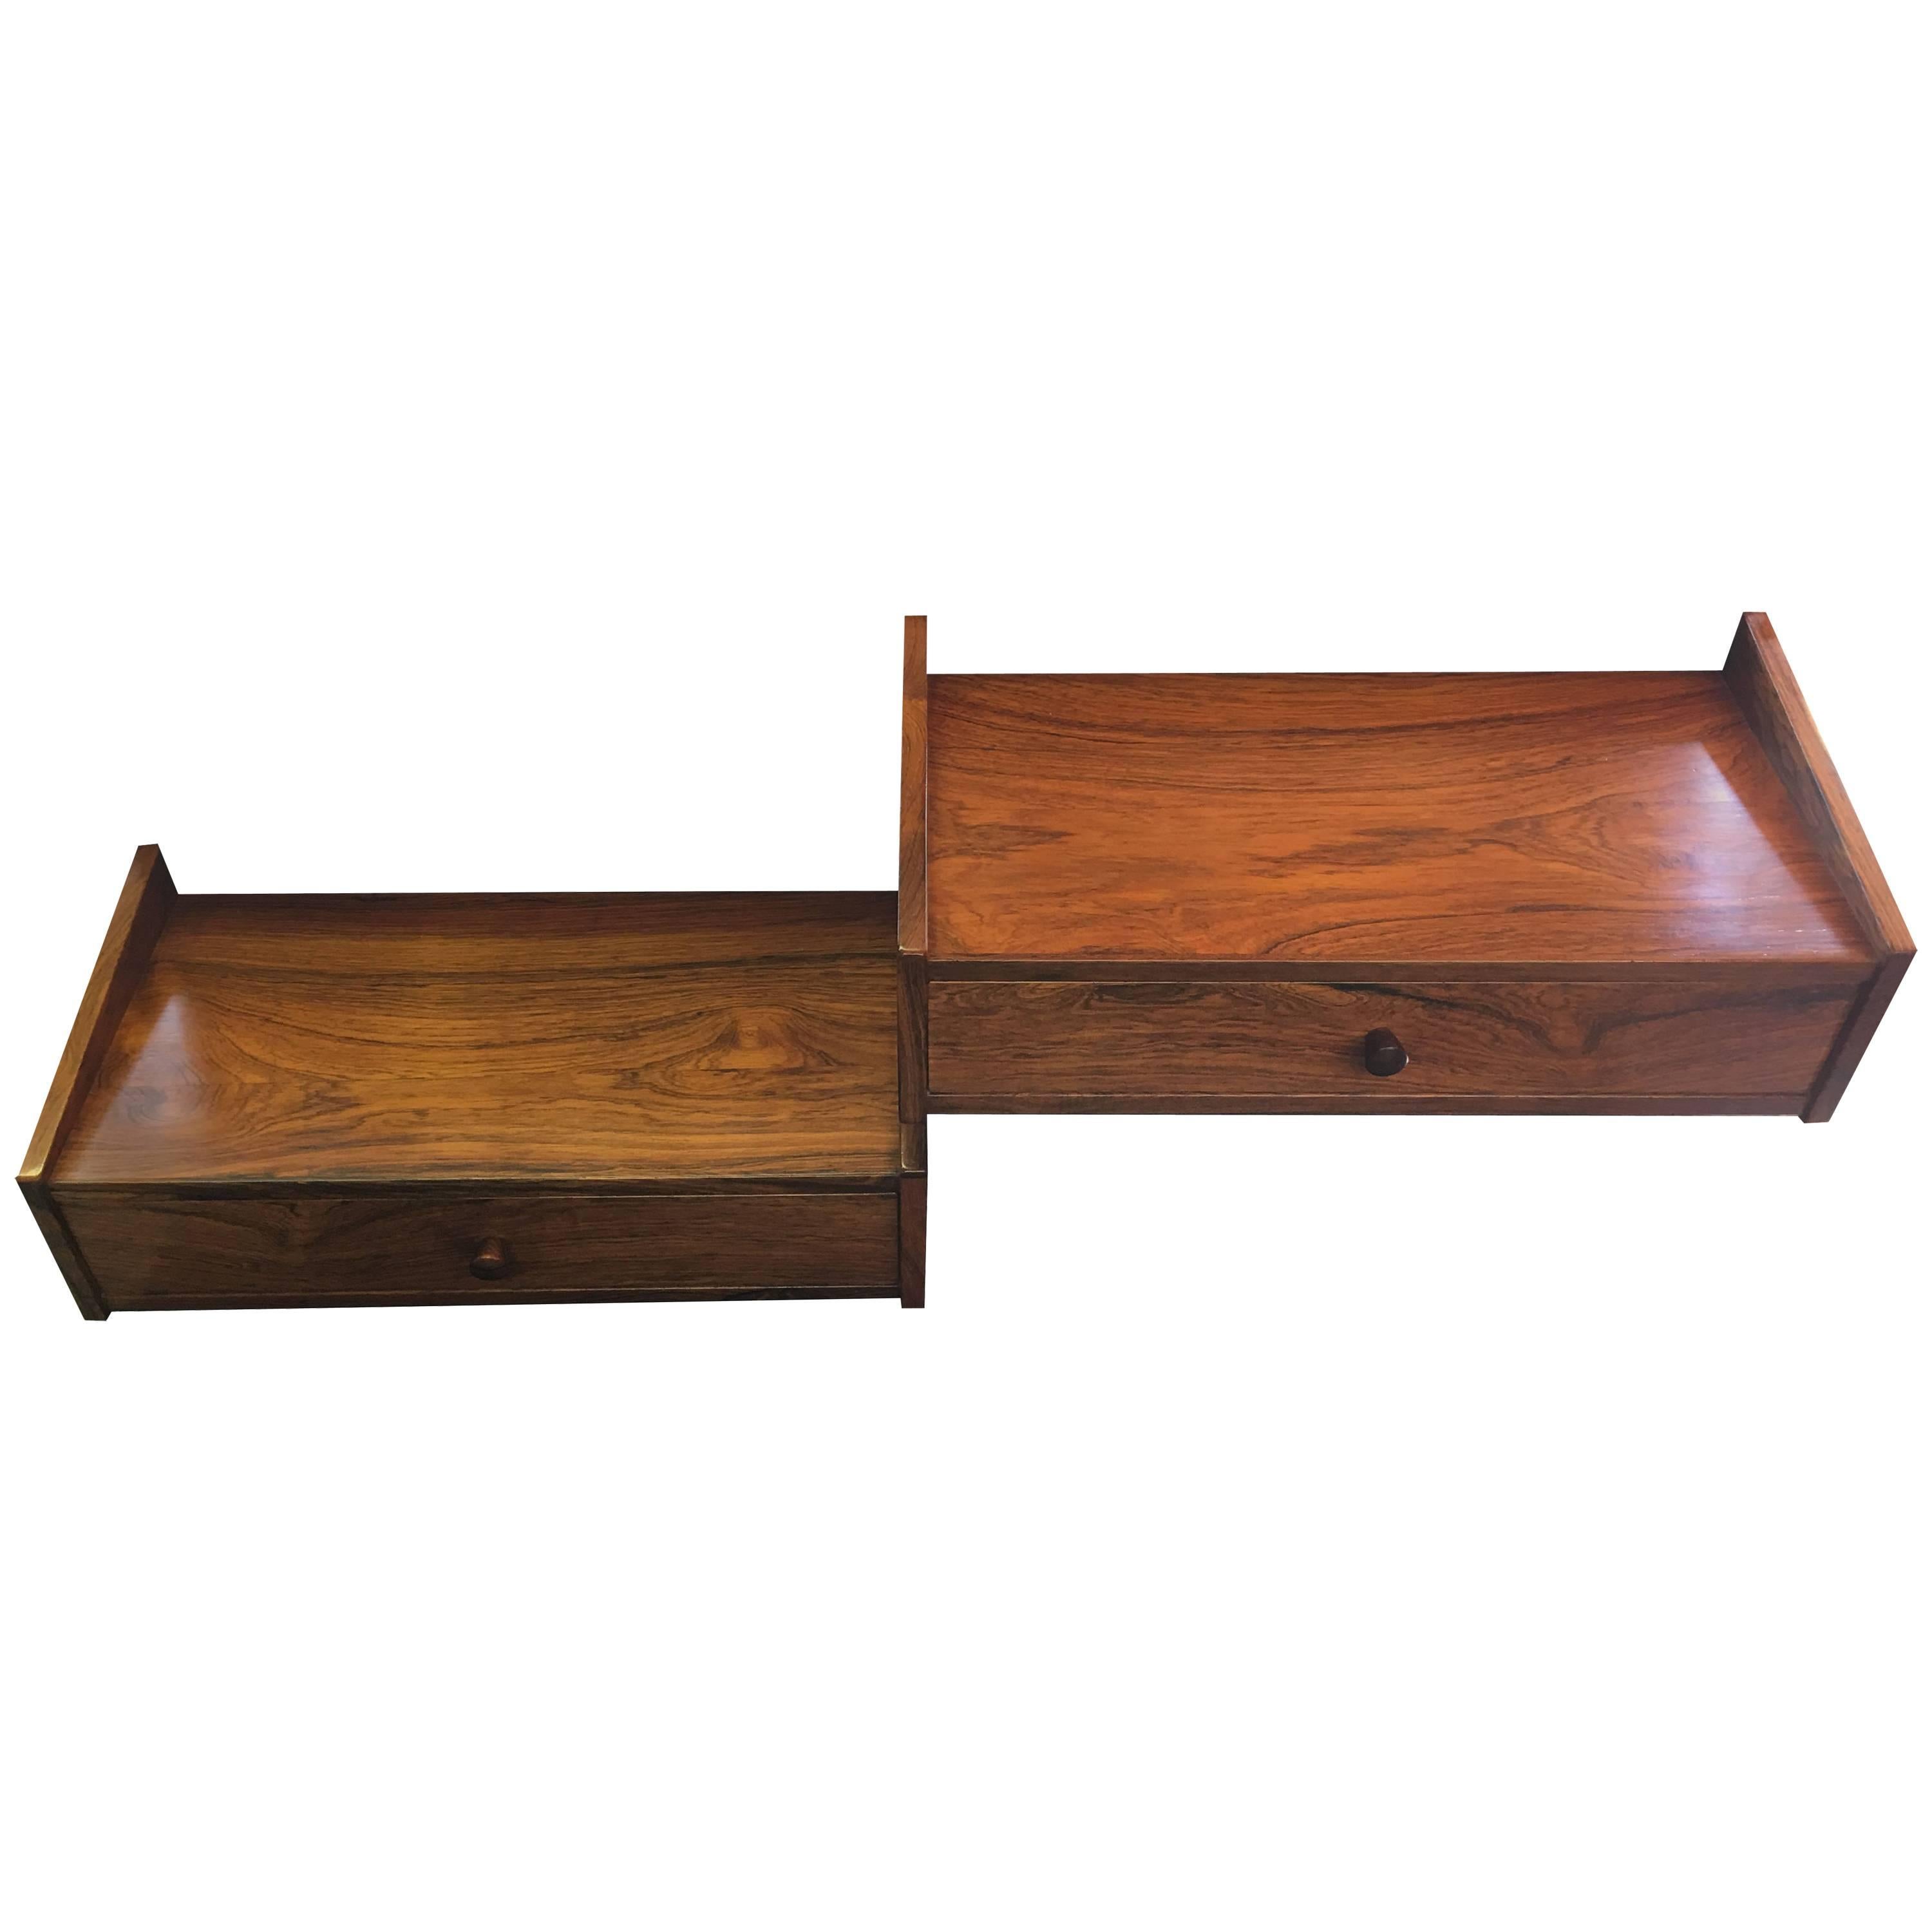 Pair of Danish Rosewood Wall Mounted Single Drawer Bedside Tables